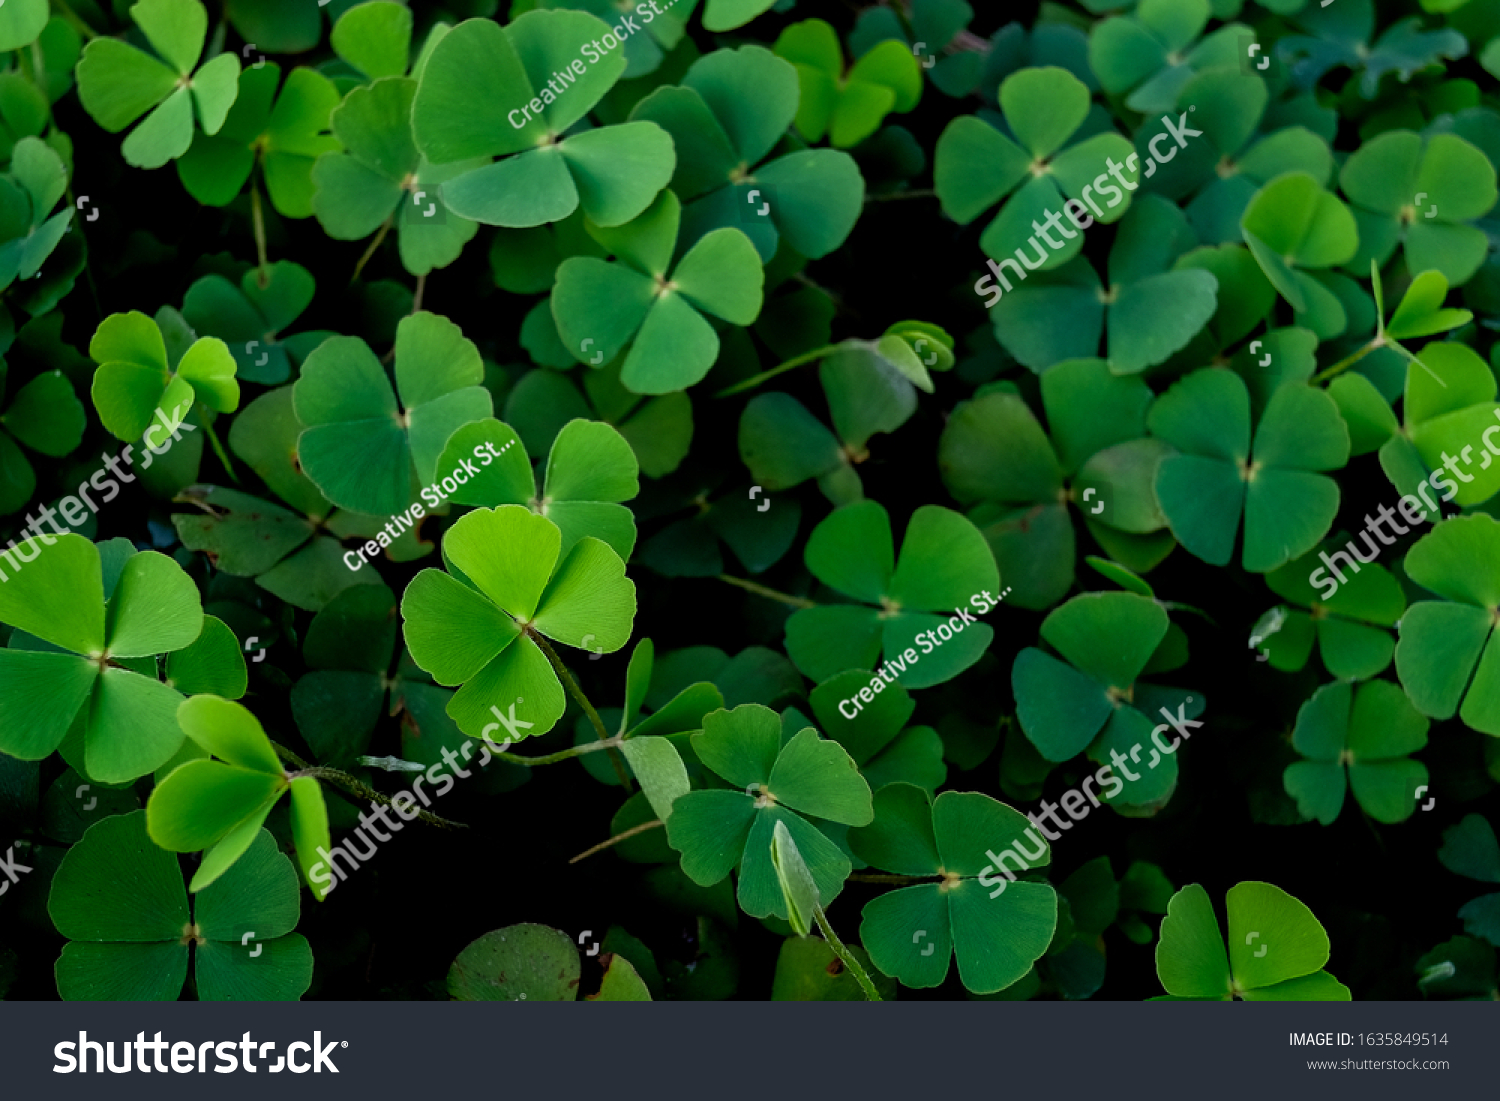 Green clover leaf isolated on white background. with three-leaved shamrocks. St. Patrick's day holiday symbol. #1635849514